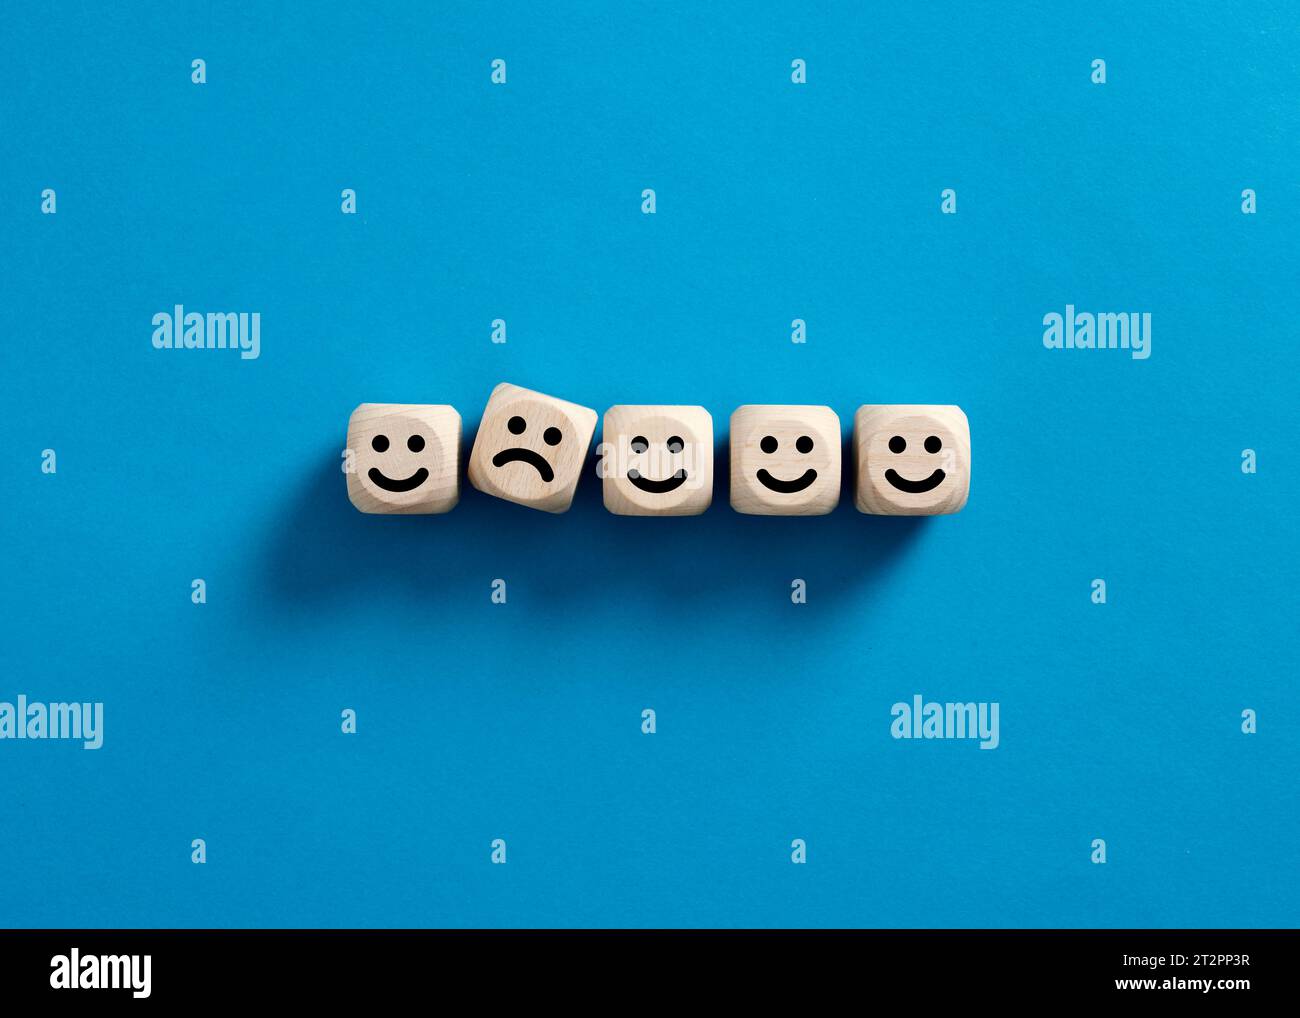 Unhappy member of the team. Teamwork adaptation. Work stress. Social nonconformity. One unhappy face between happy faces on wooden cubes. Stock Photo